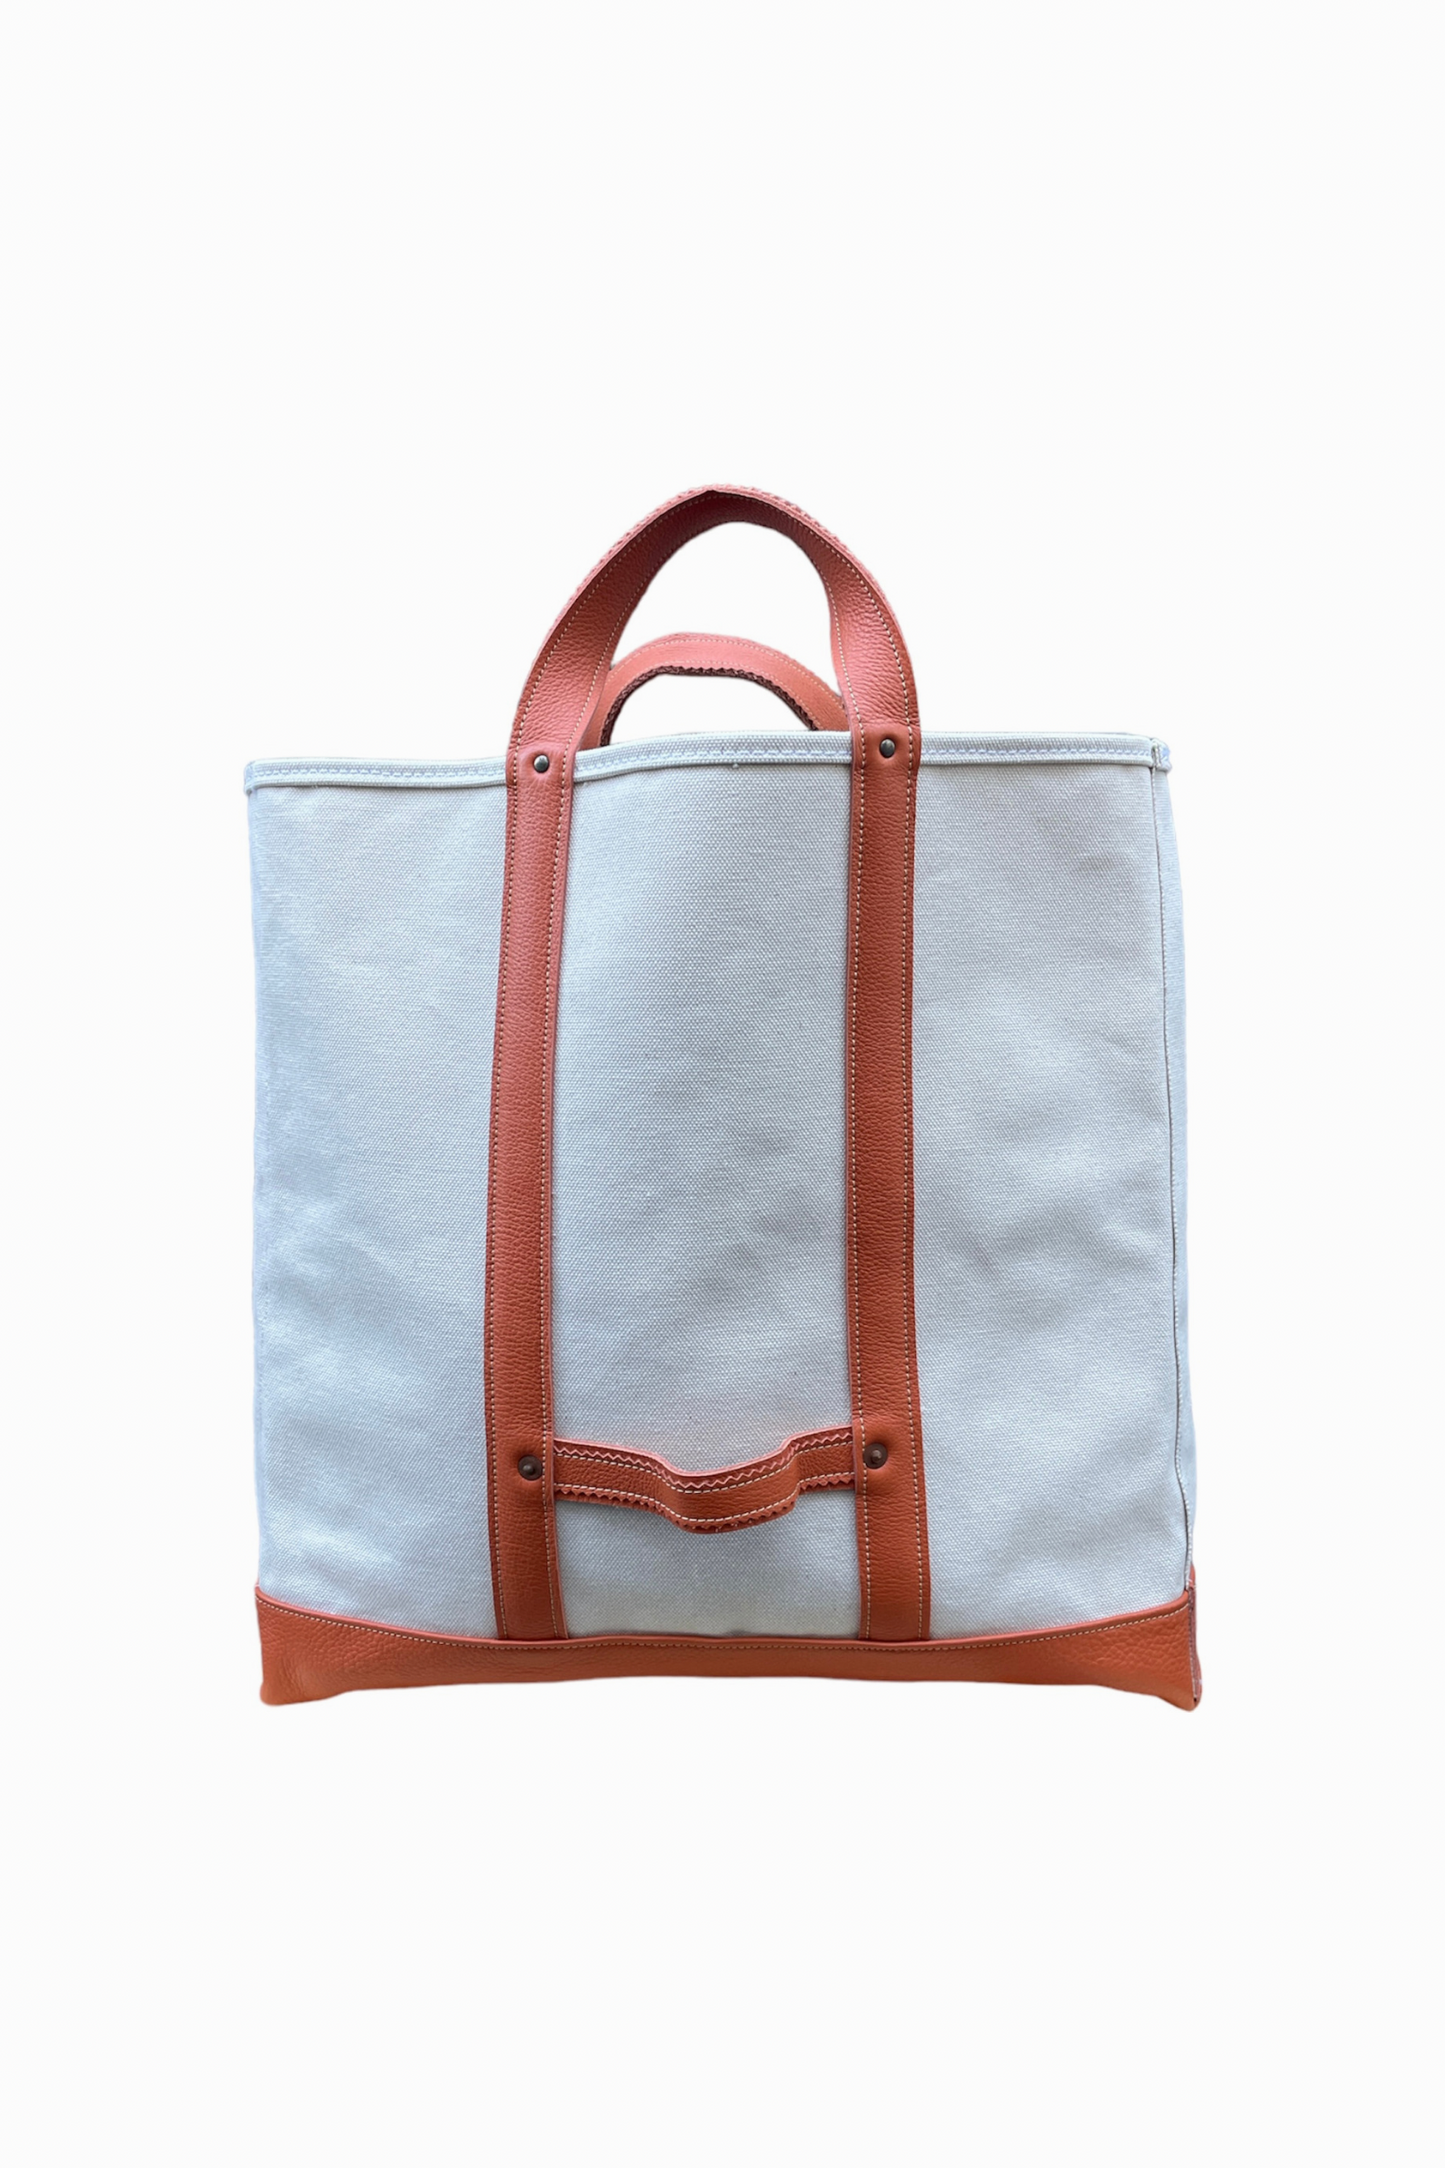 CANVAS BAG with LEATHER